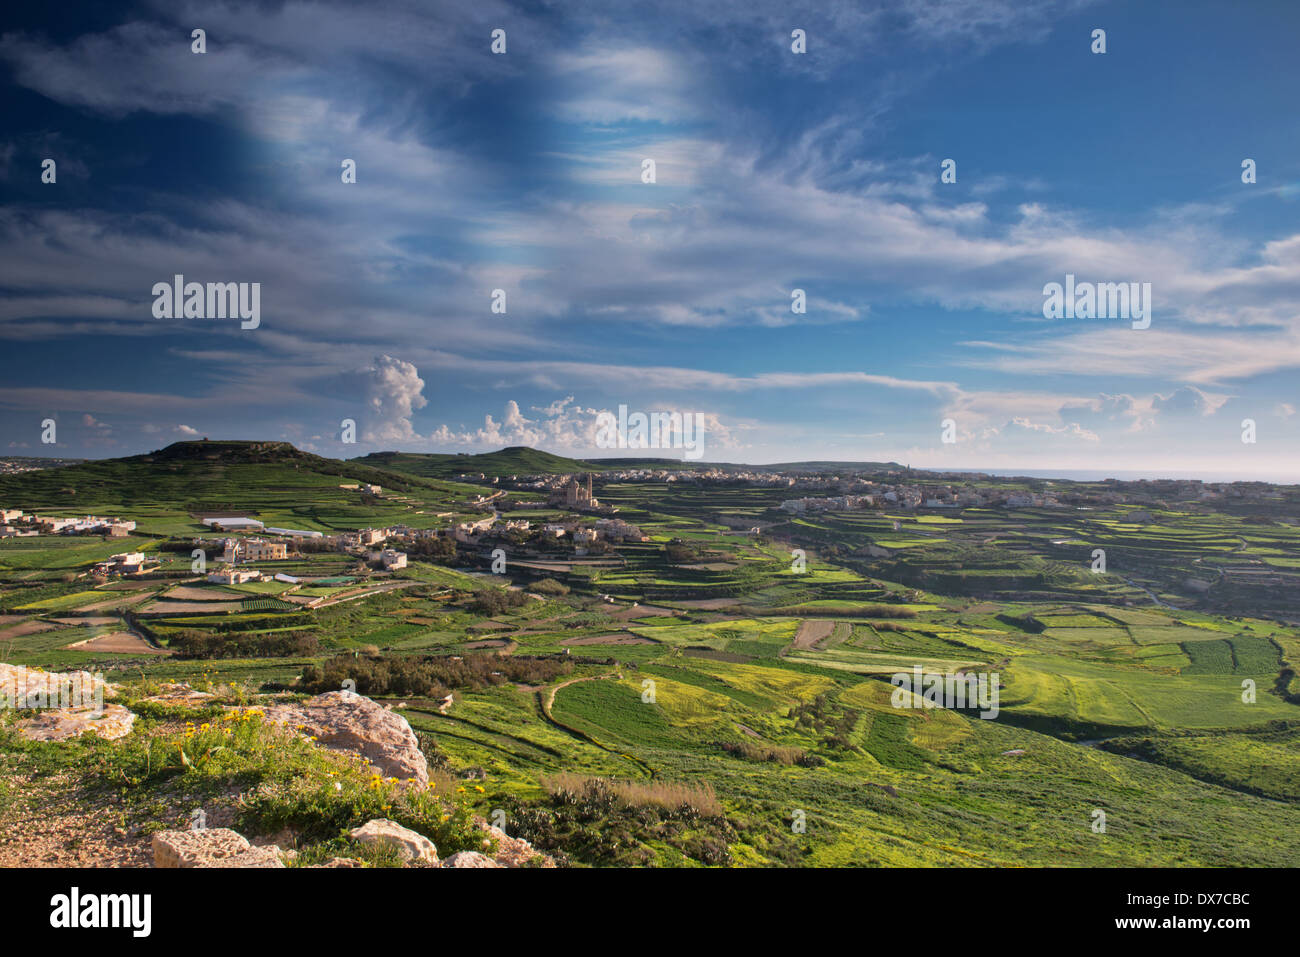 Views Of Gozo,Ta Pinu Church and Surrounding Areas Taken From The Hill Top Where The Gordan Lighthouse Stands, Ghasri, Gozo. Stock Photo